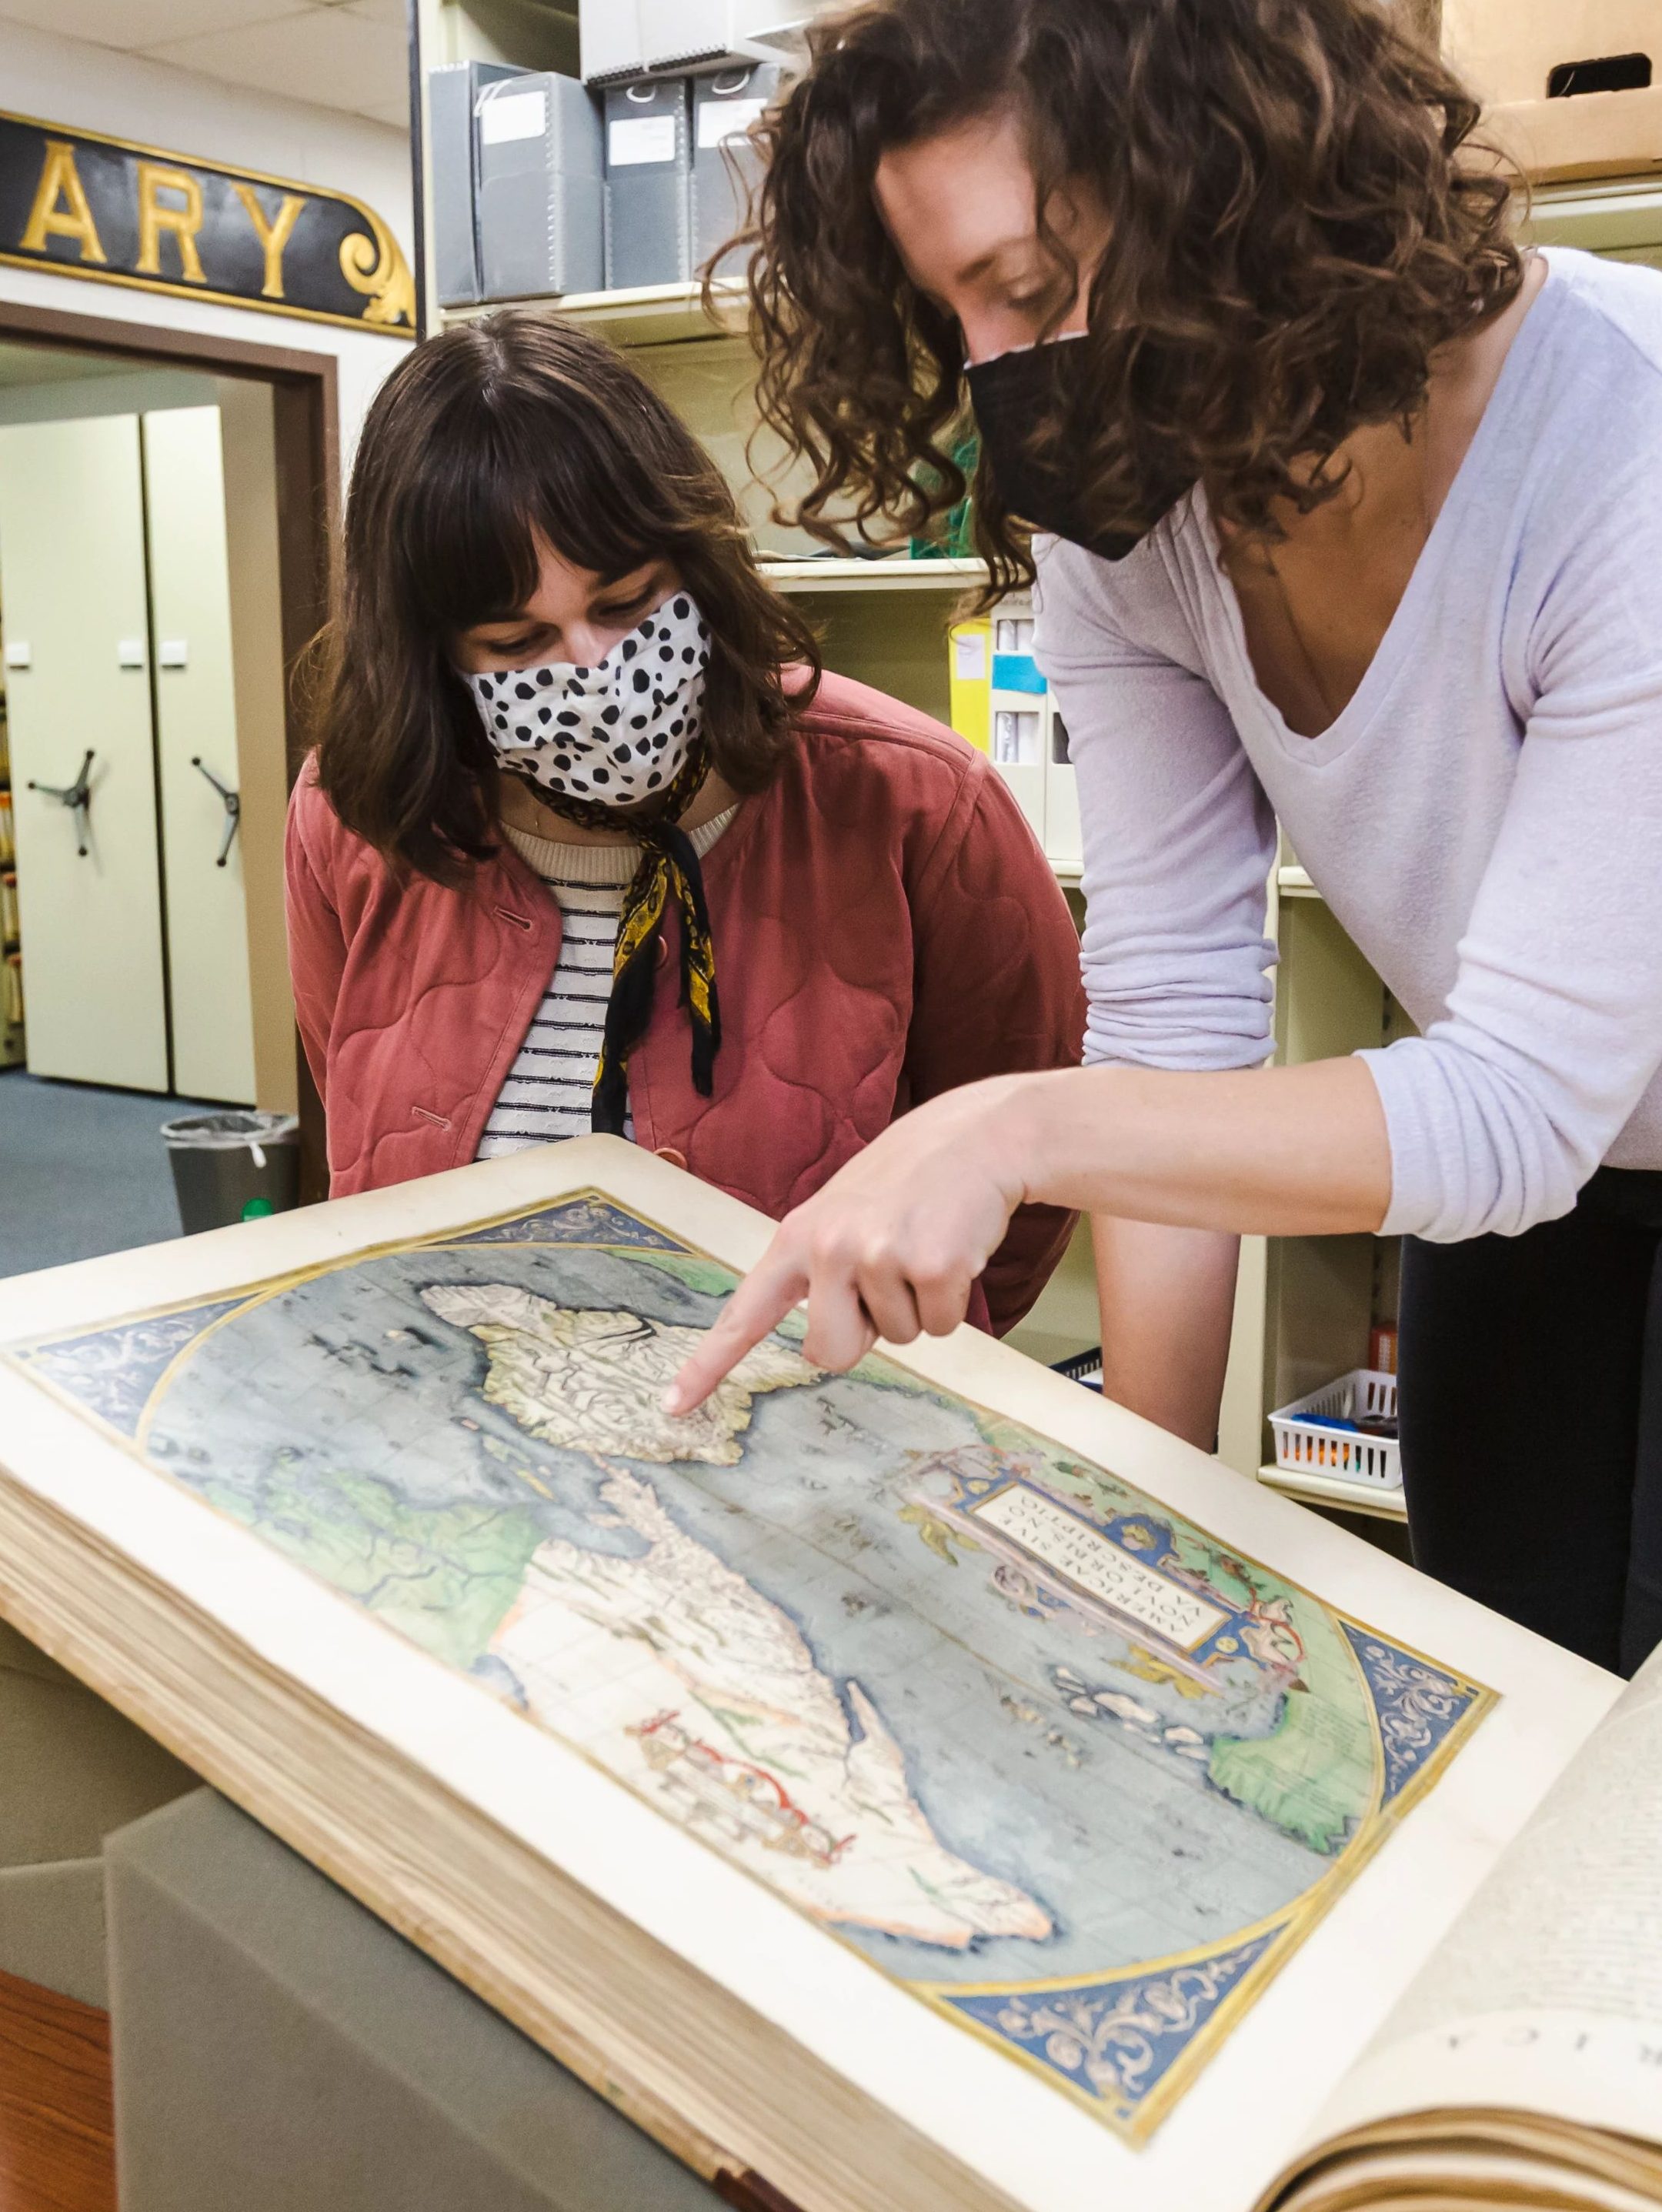 Museum educator Jennifer Hackney showing a guest a cool point on a world atlas.